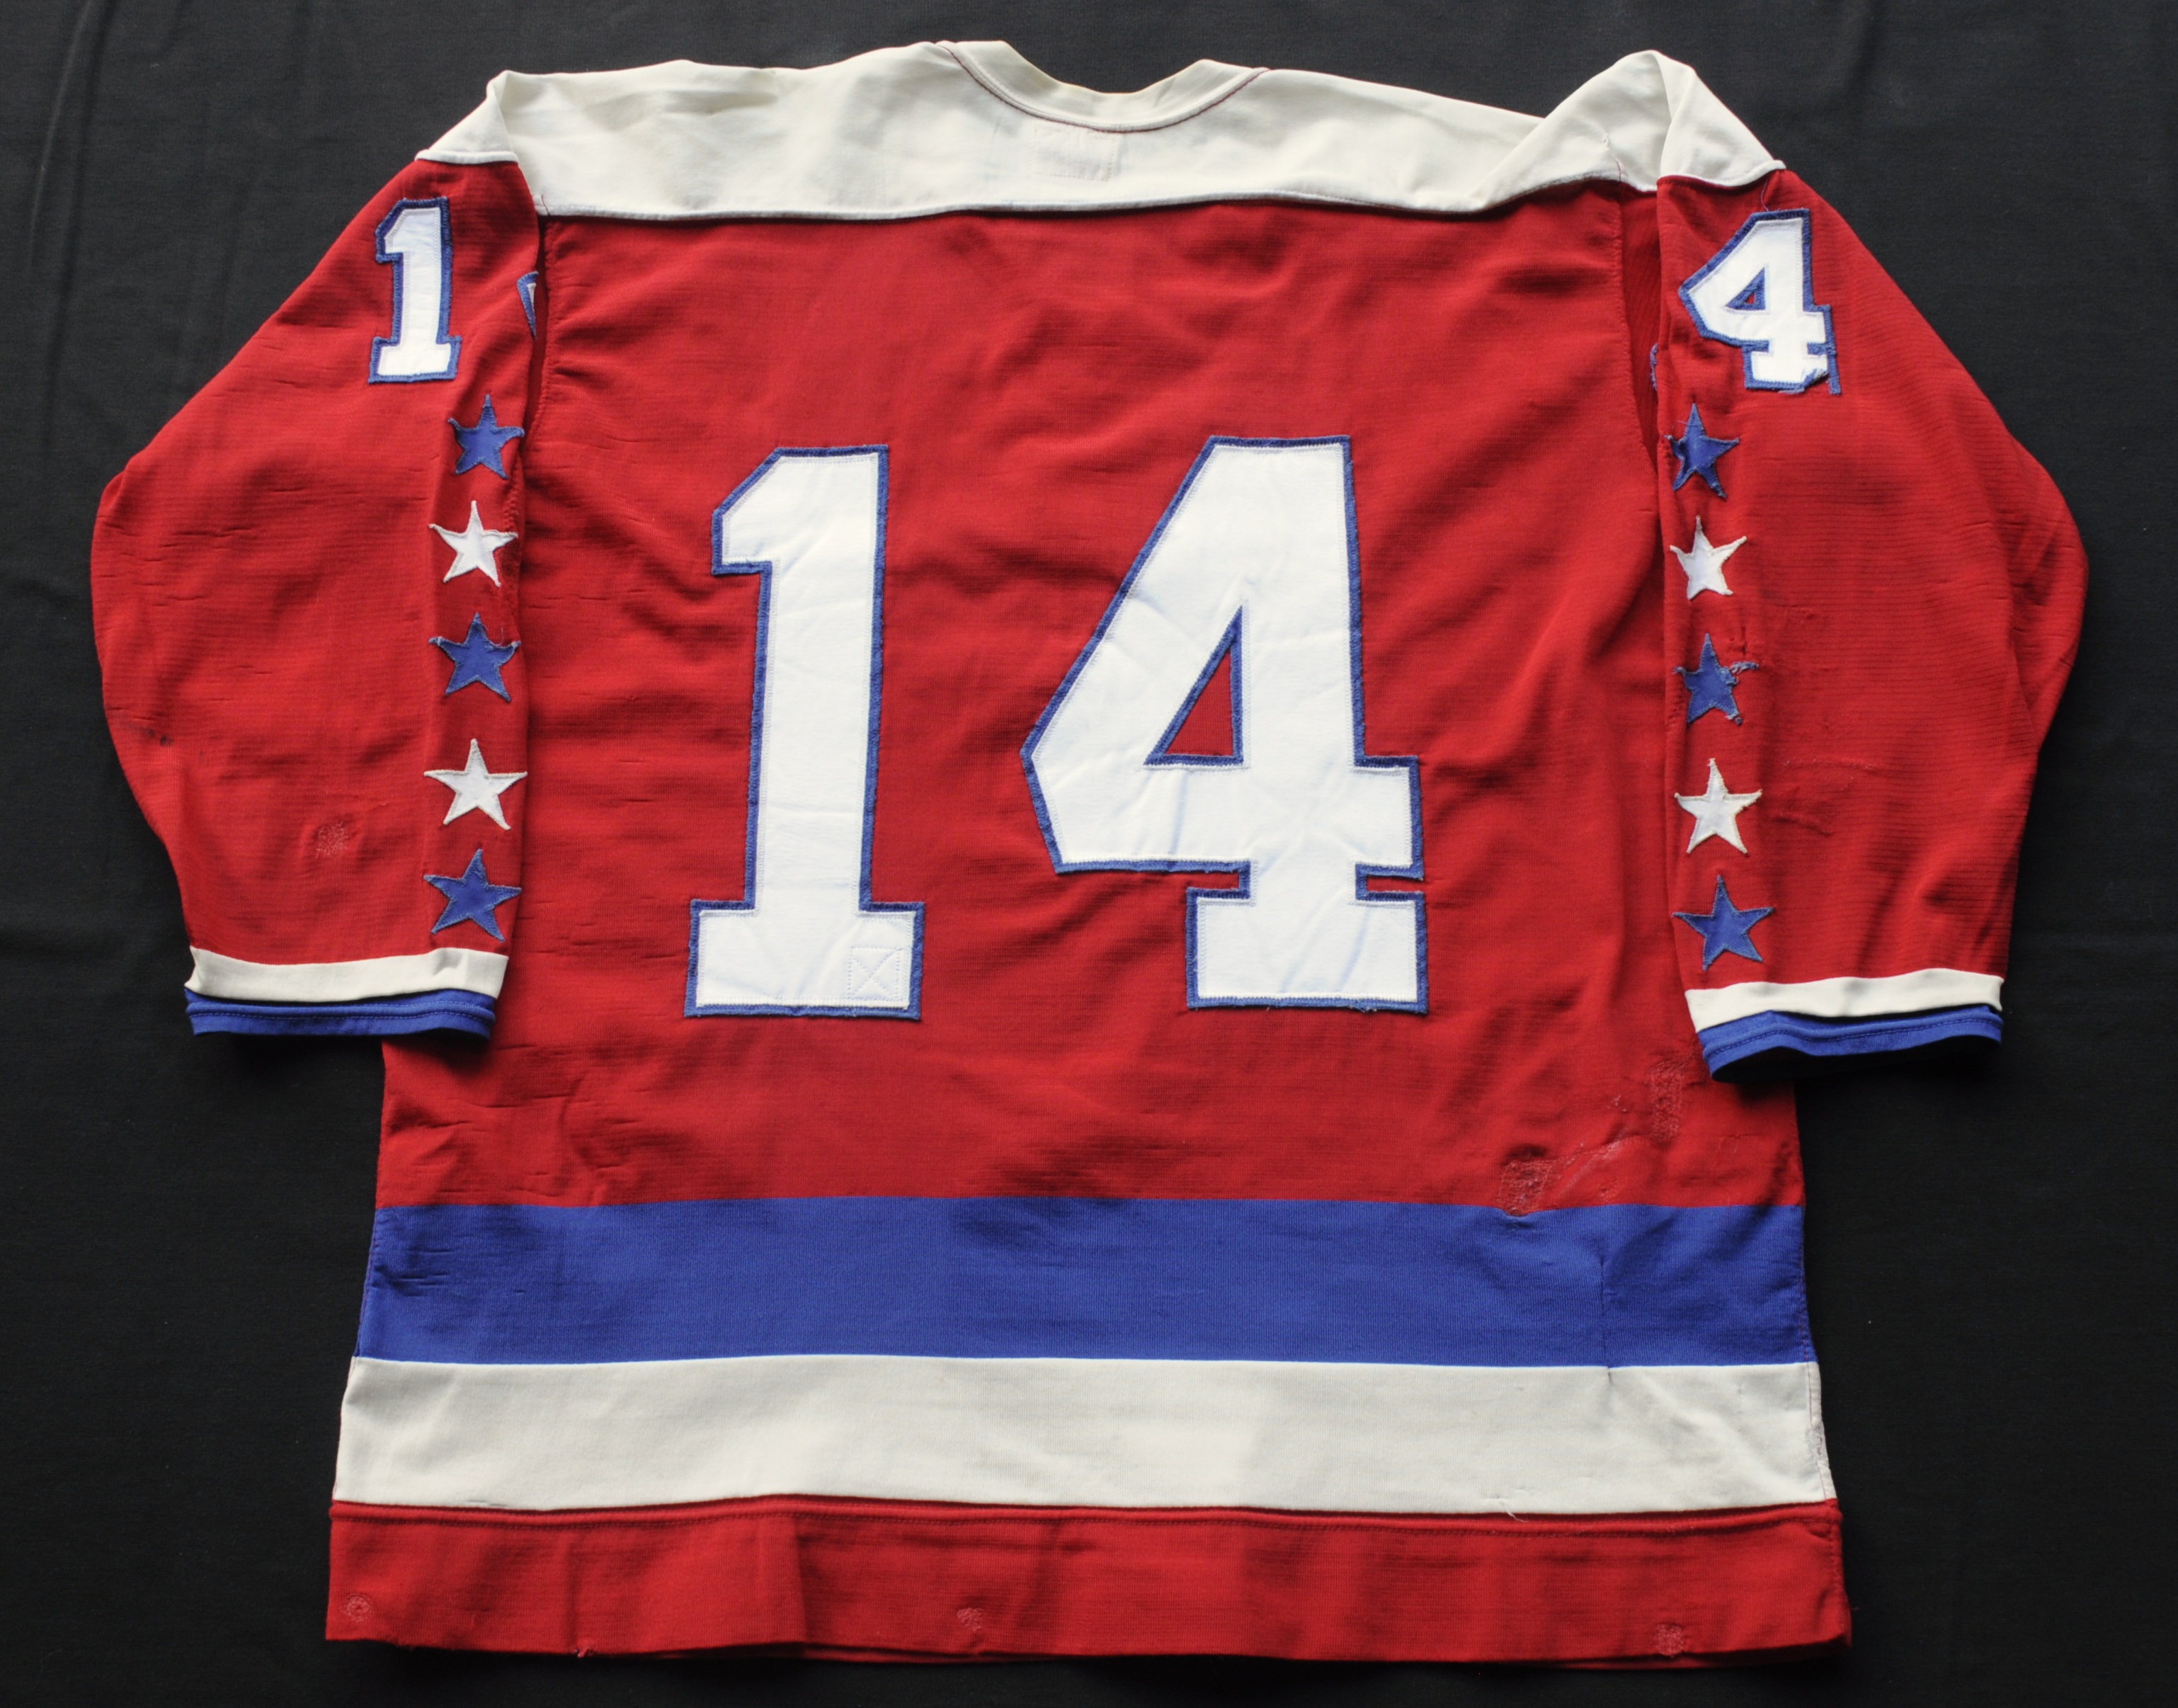 Mid 1970's Ron Low Game Issued Washington Capitals Jersey., Lot #82445